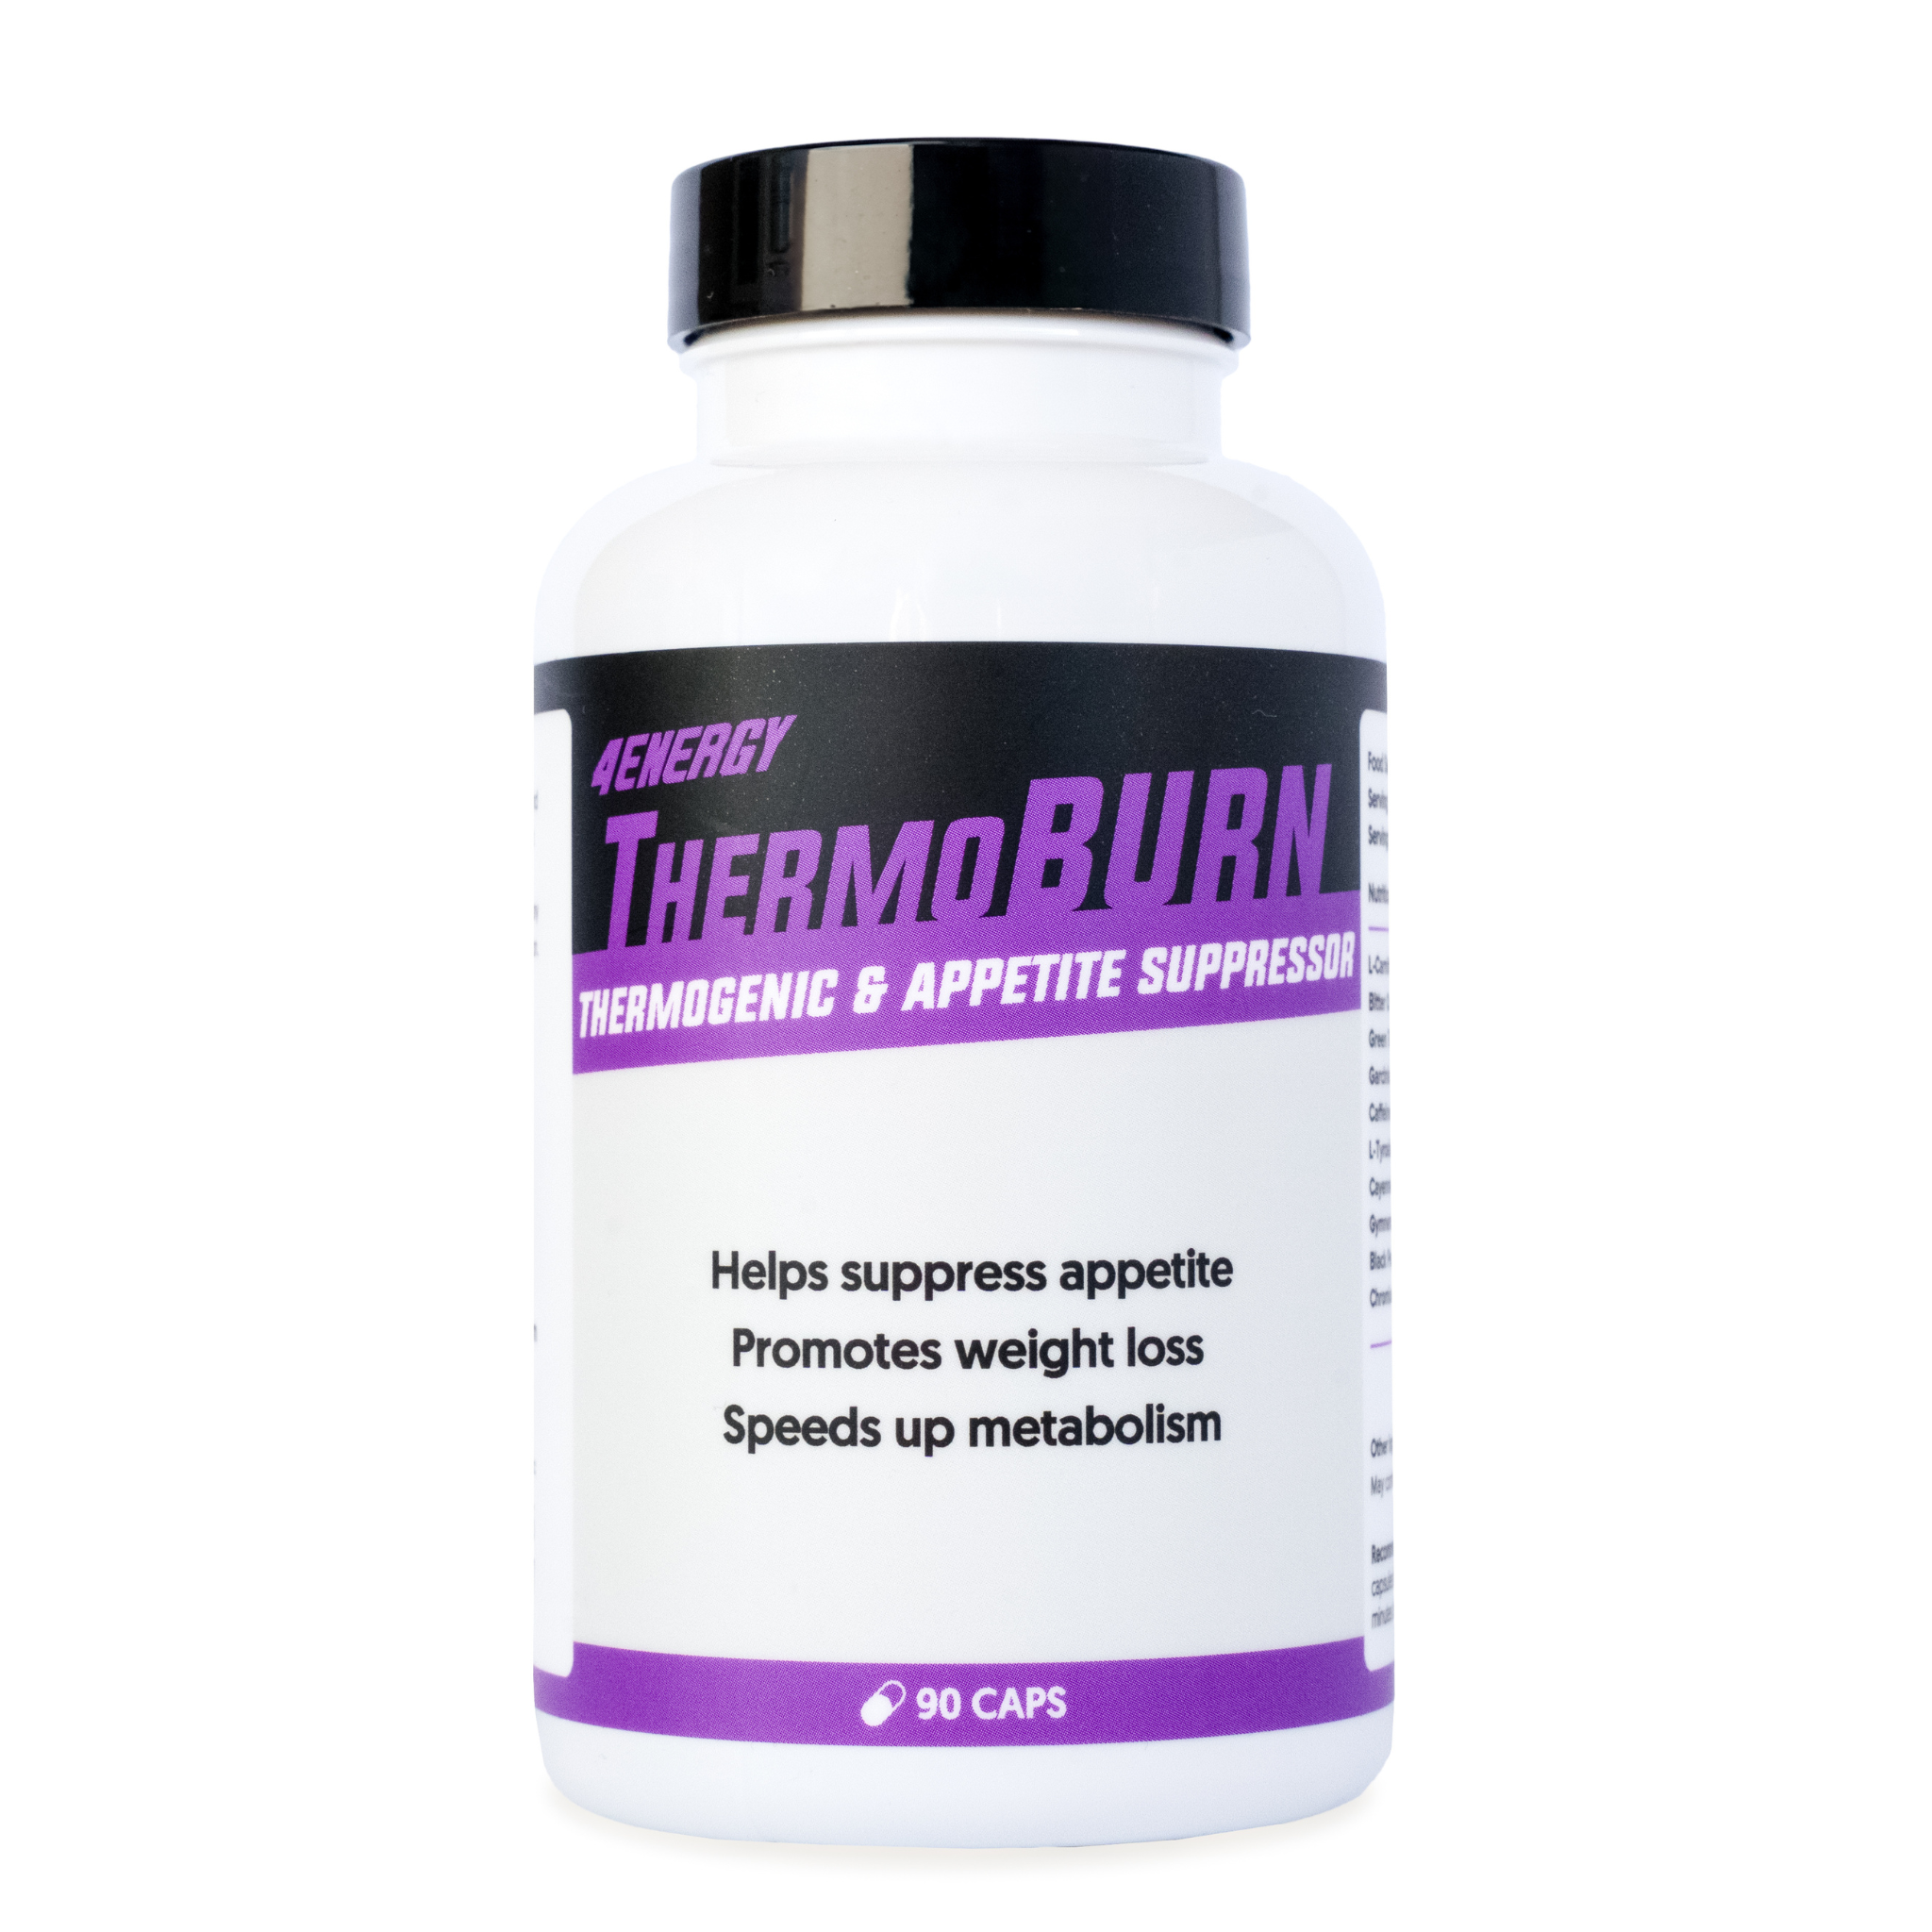 Thermogenic effects on appetite